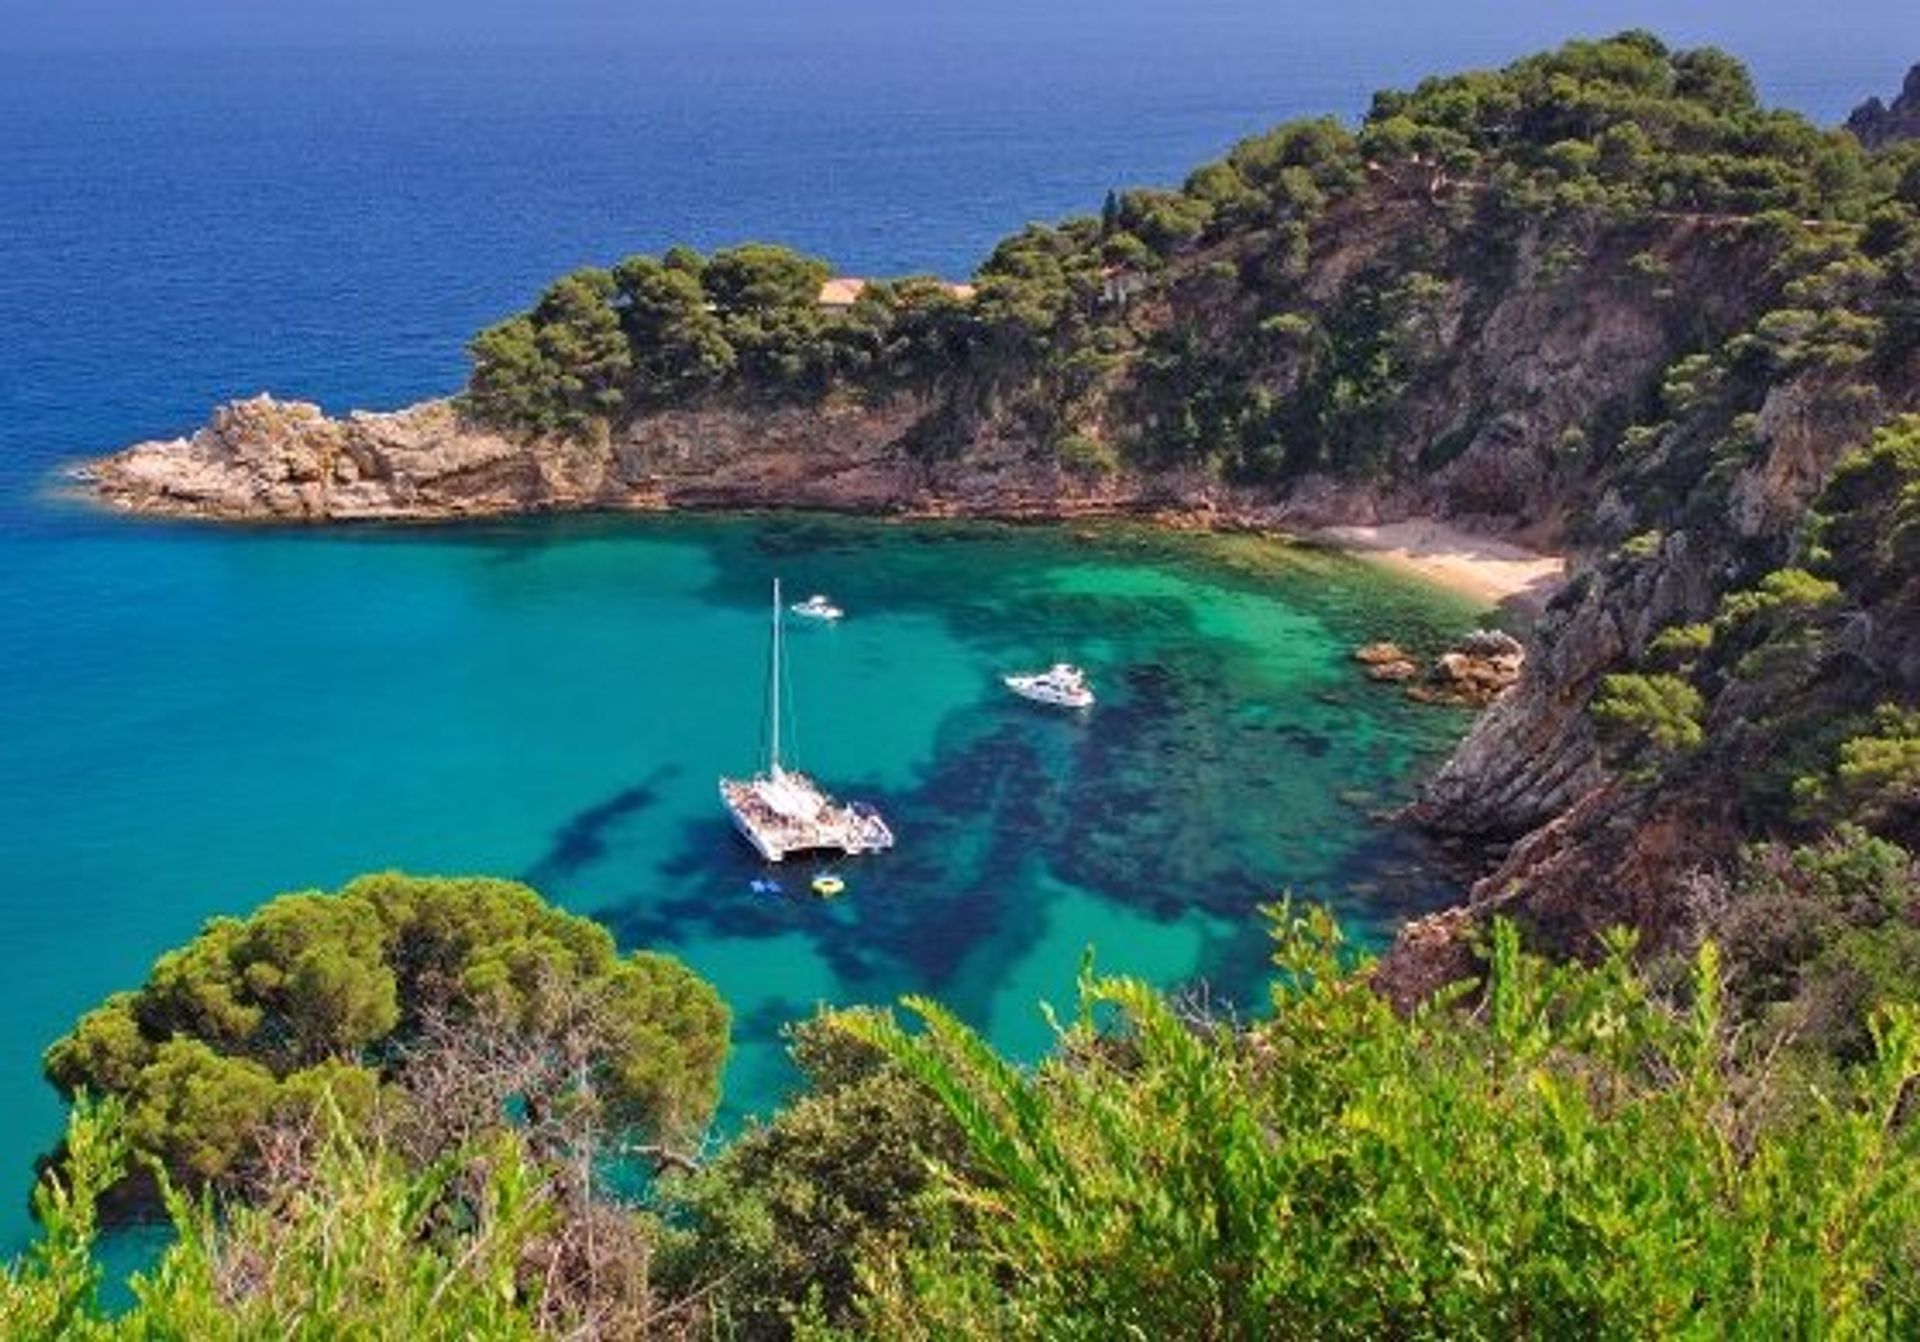 Tossa de Mar's landscape is a paradise of lush rich greenery, sparkling blue waters and rocky coves